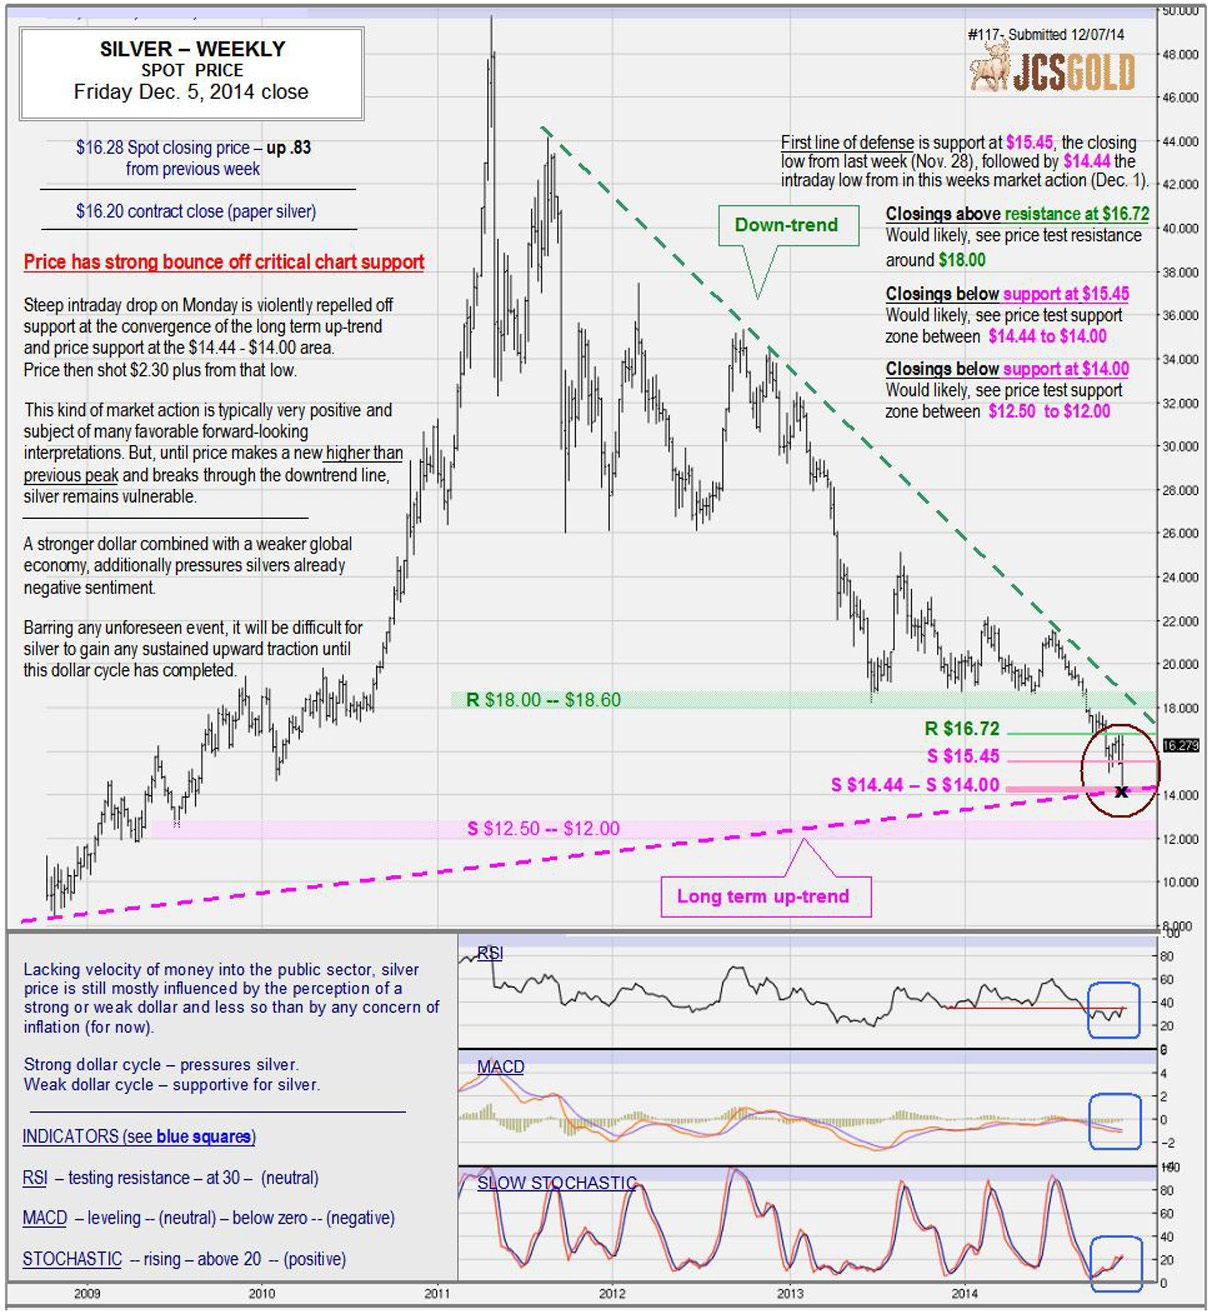 Dec 5, 2014 chart & commentary